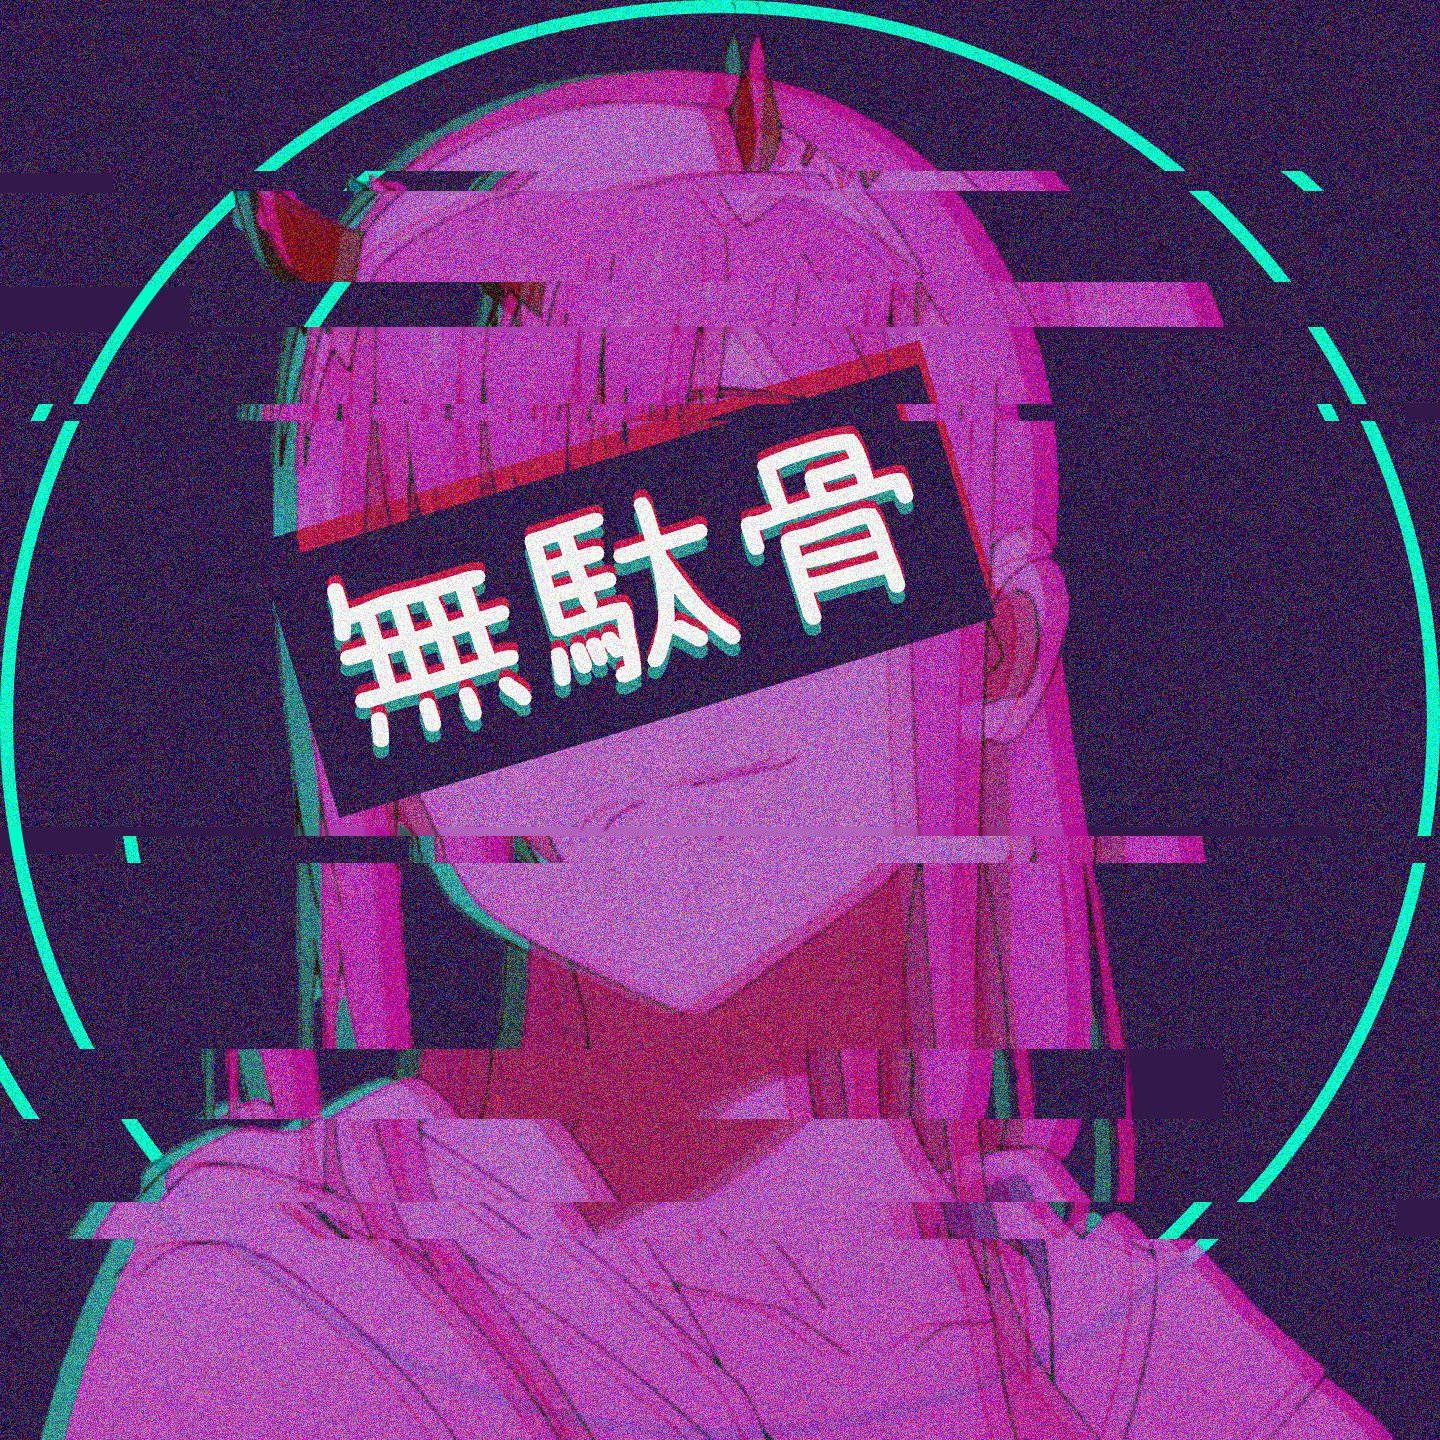 A cyberpunk portrait of a woman with the text 